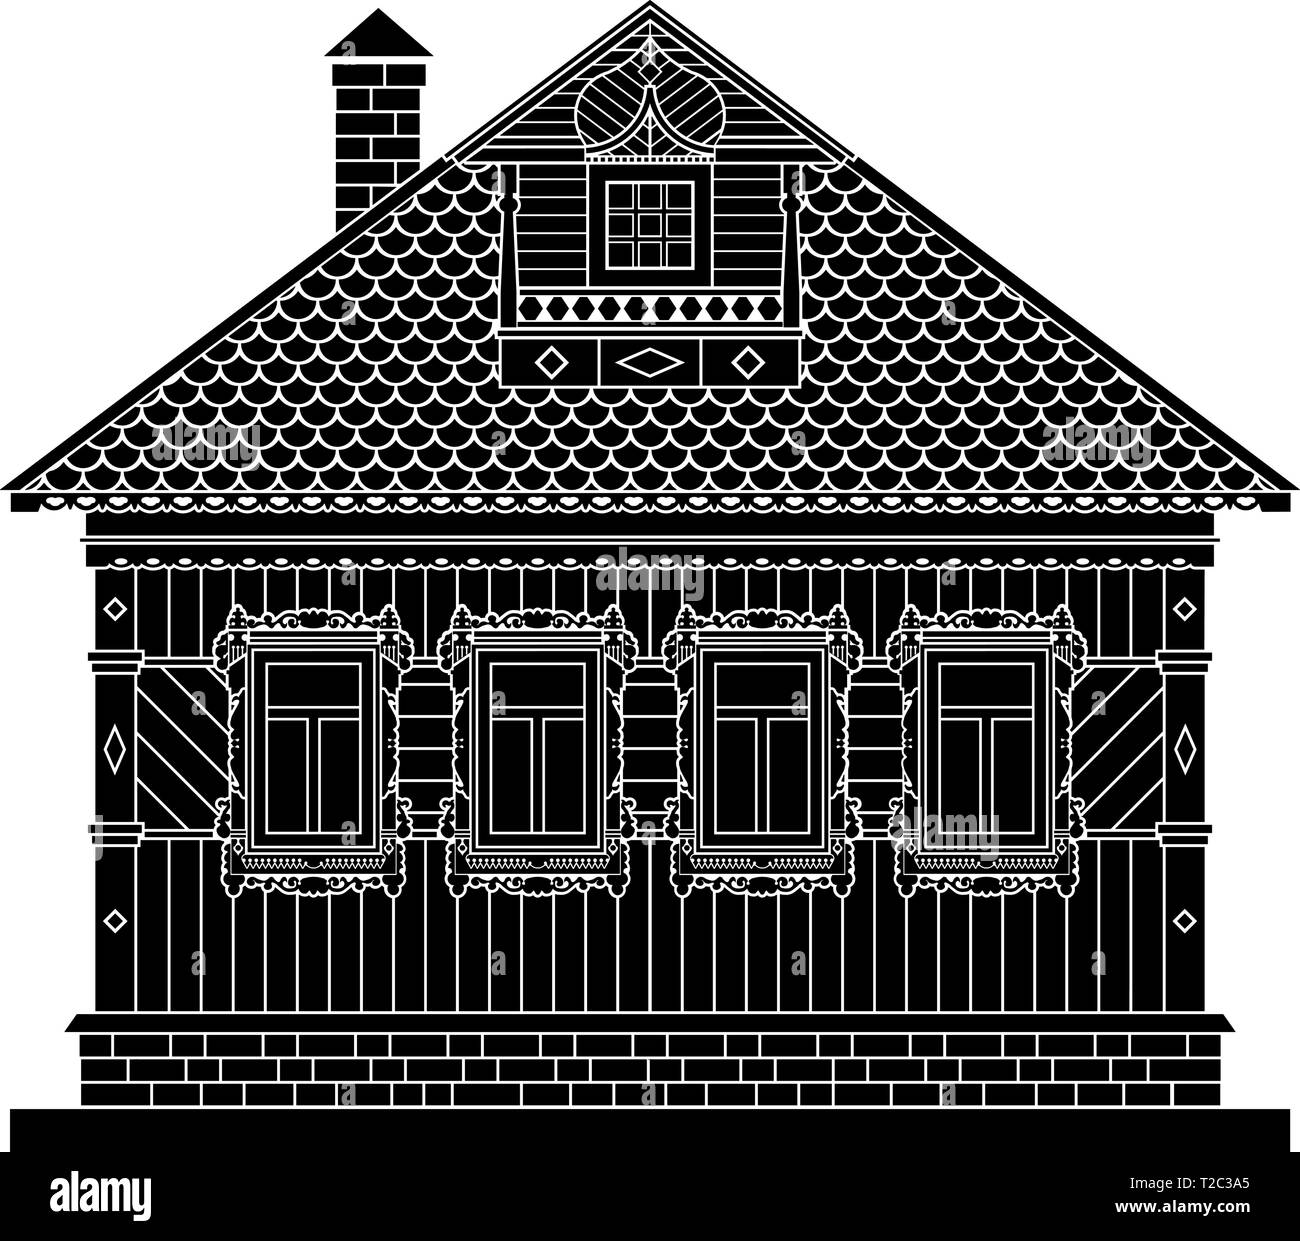 Russian traditional two-story wooden house. The windows and details are decorated with carvings. Vector . Black silhouette. Stock Vector